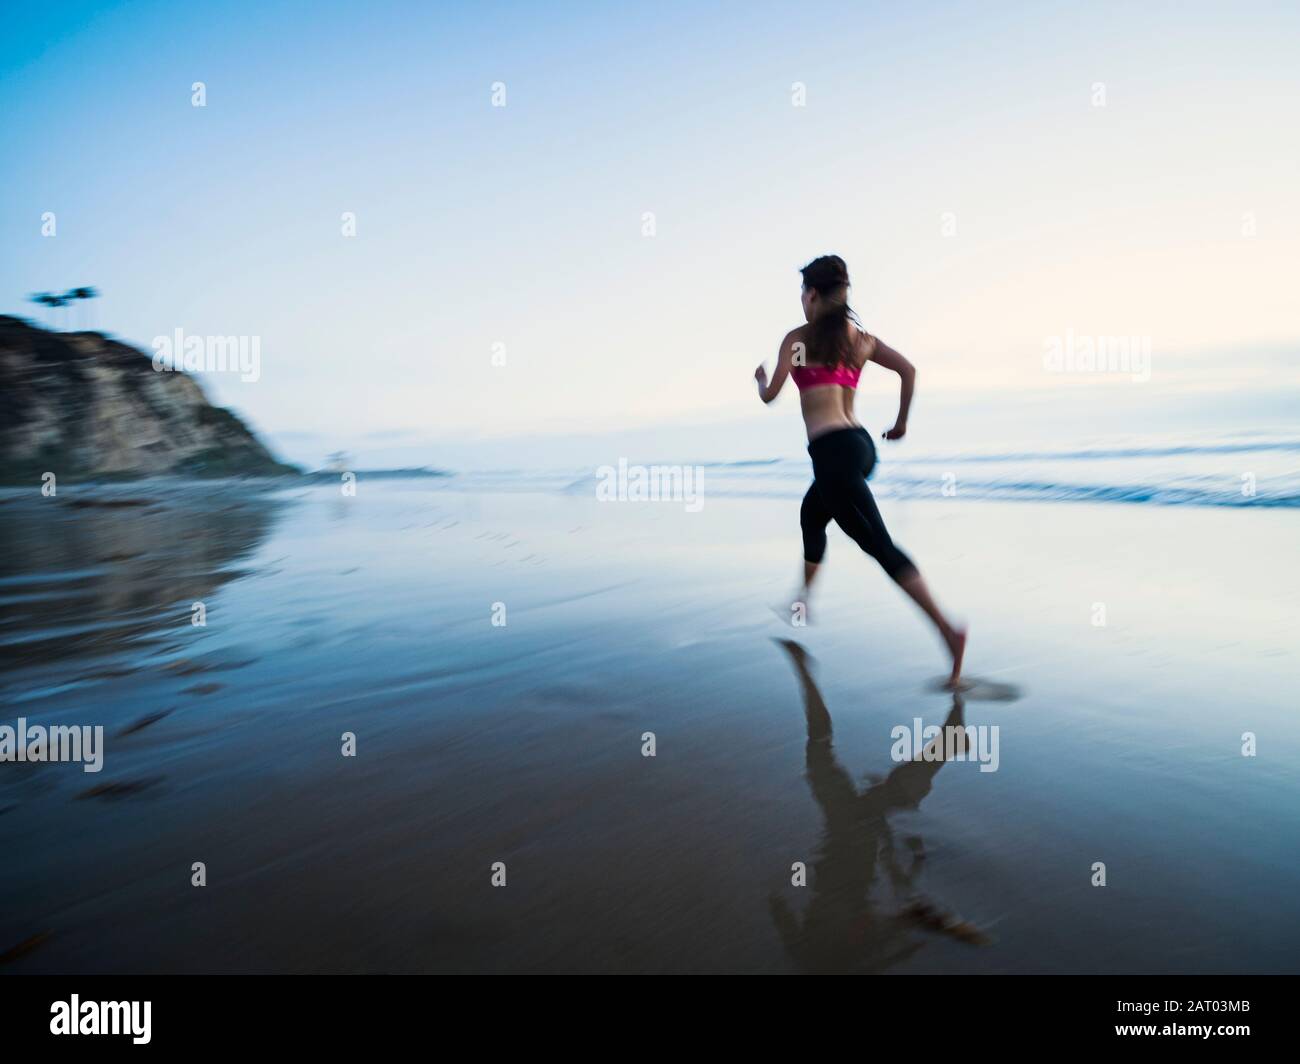 Young woman running on beach Stock Photo